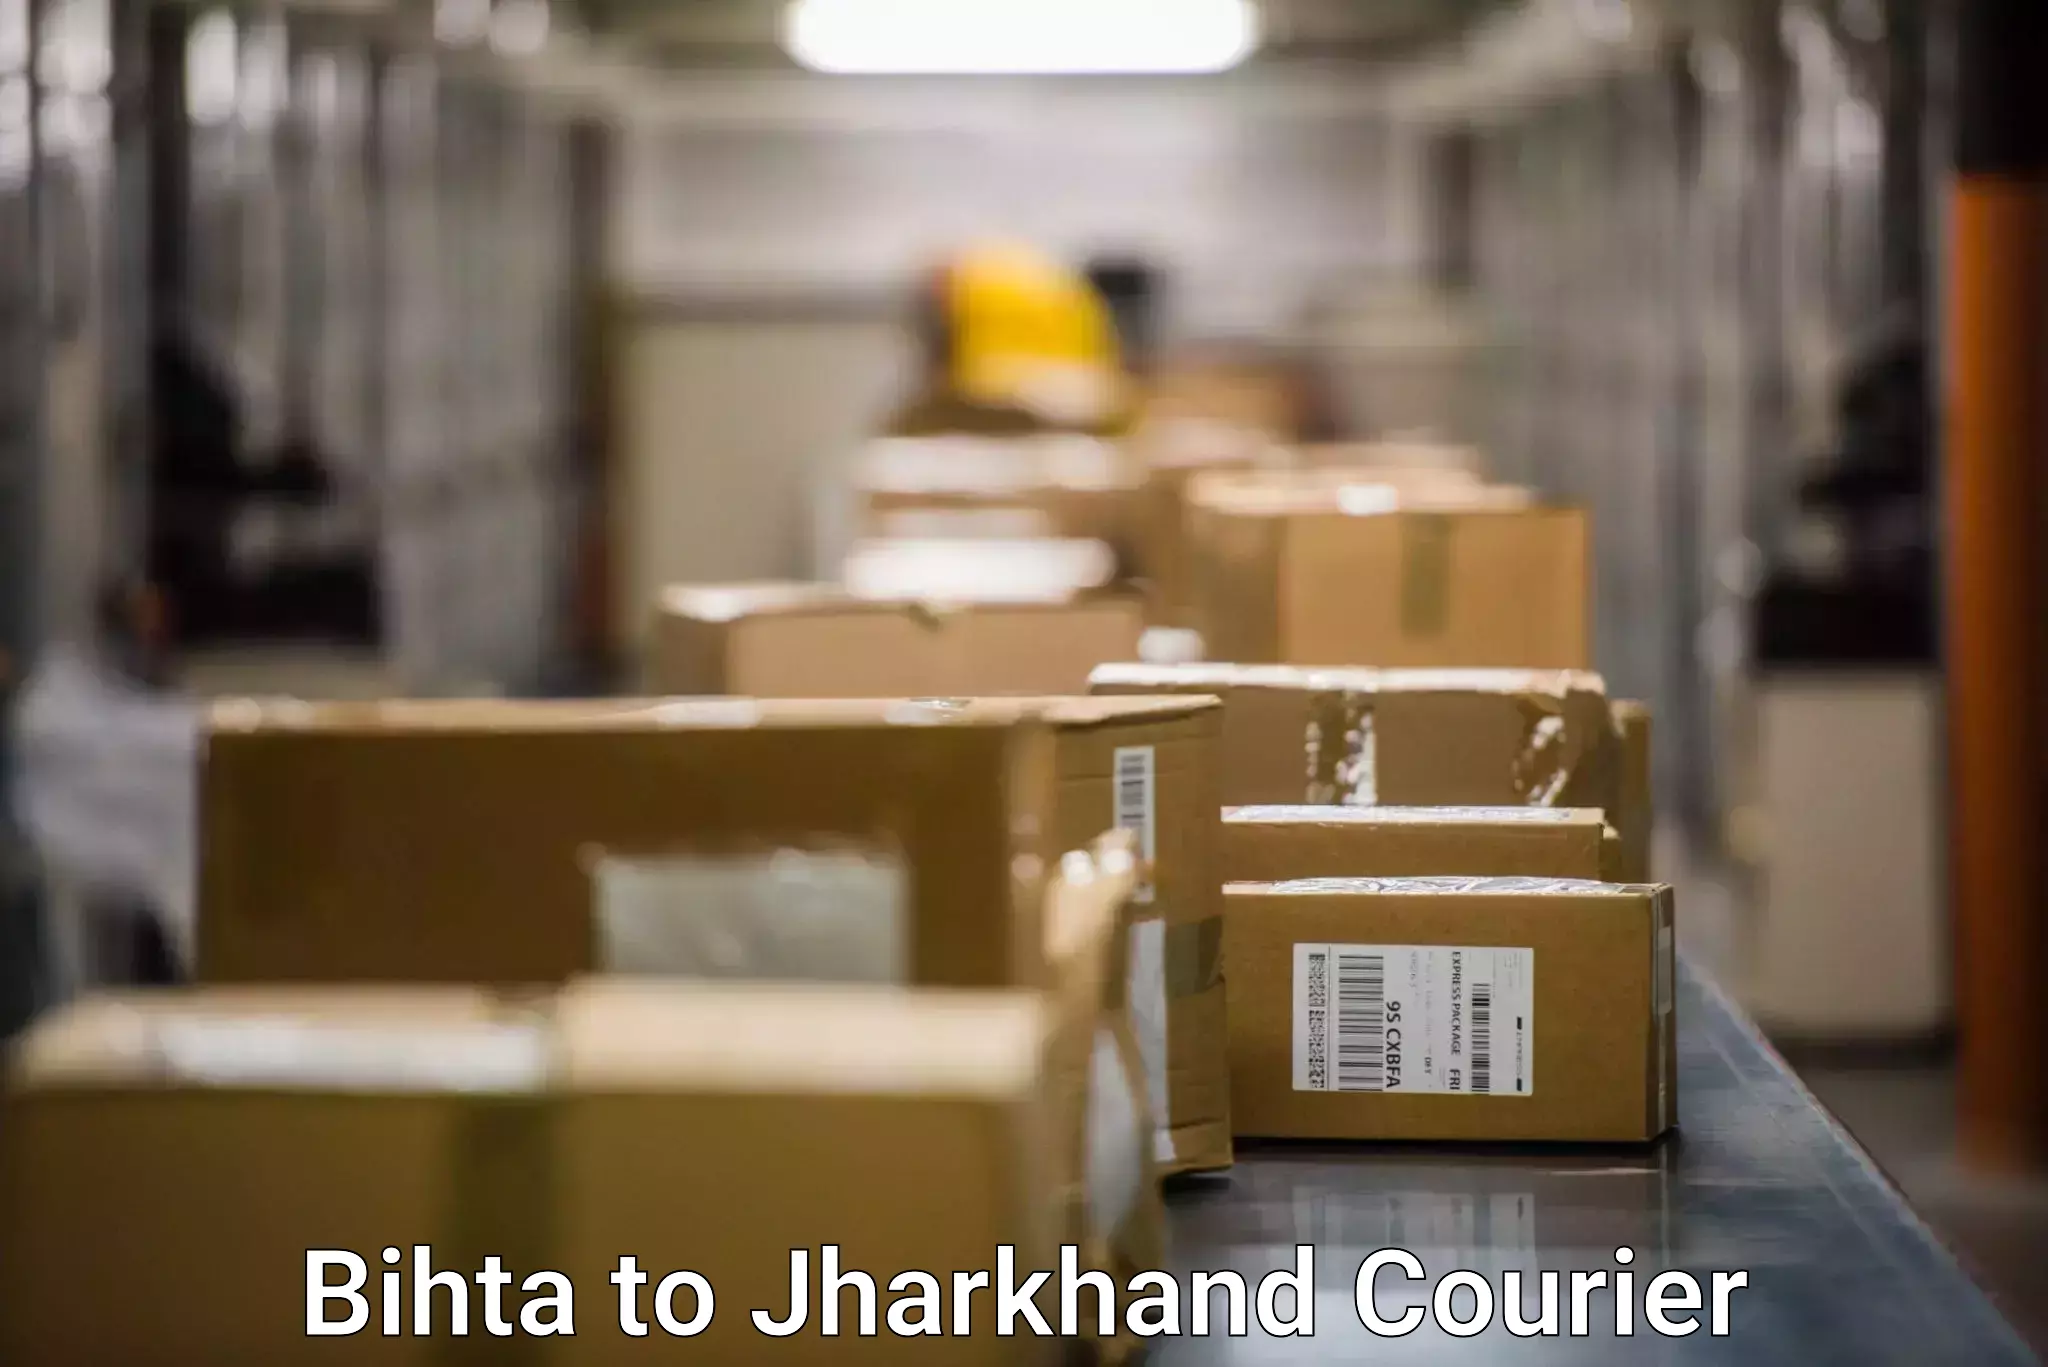 Advanced tracking systems Bihta to Jamshedpur